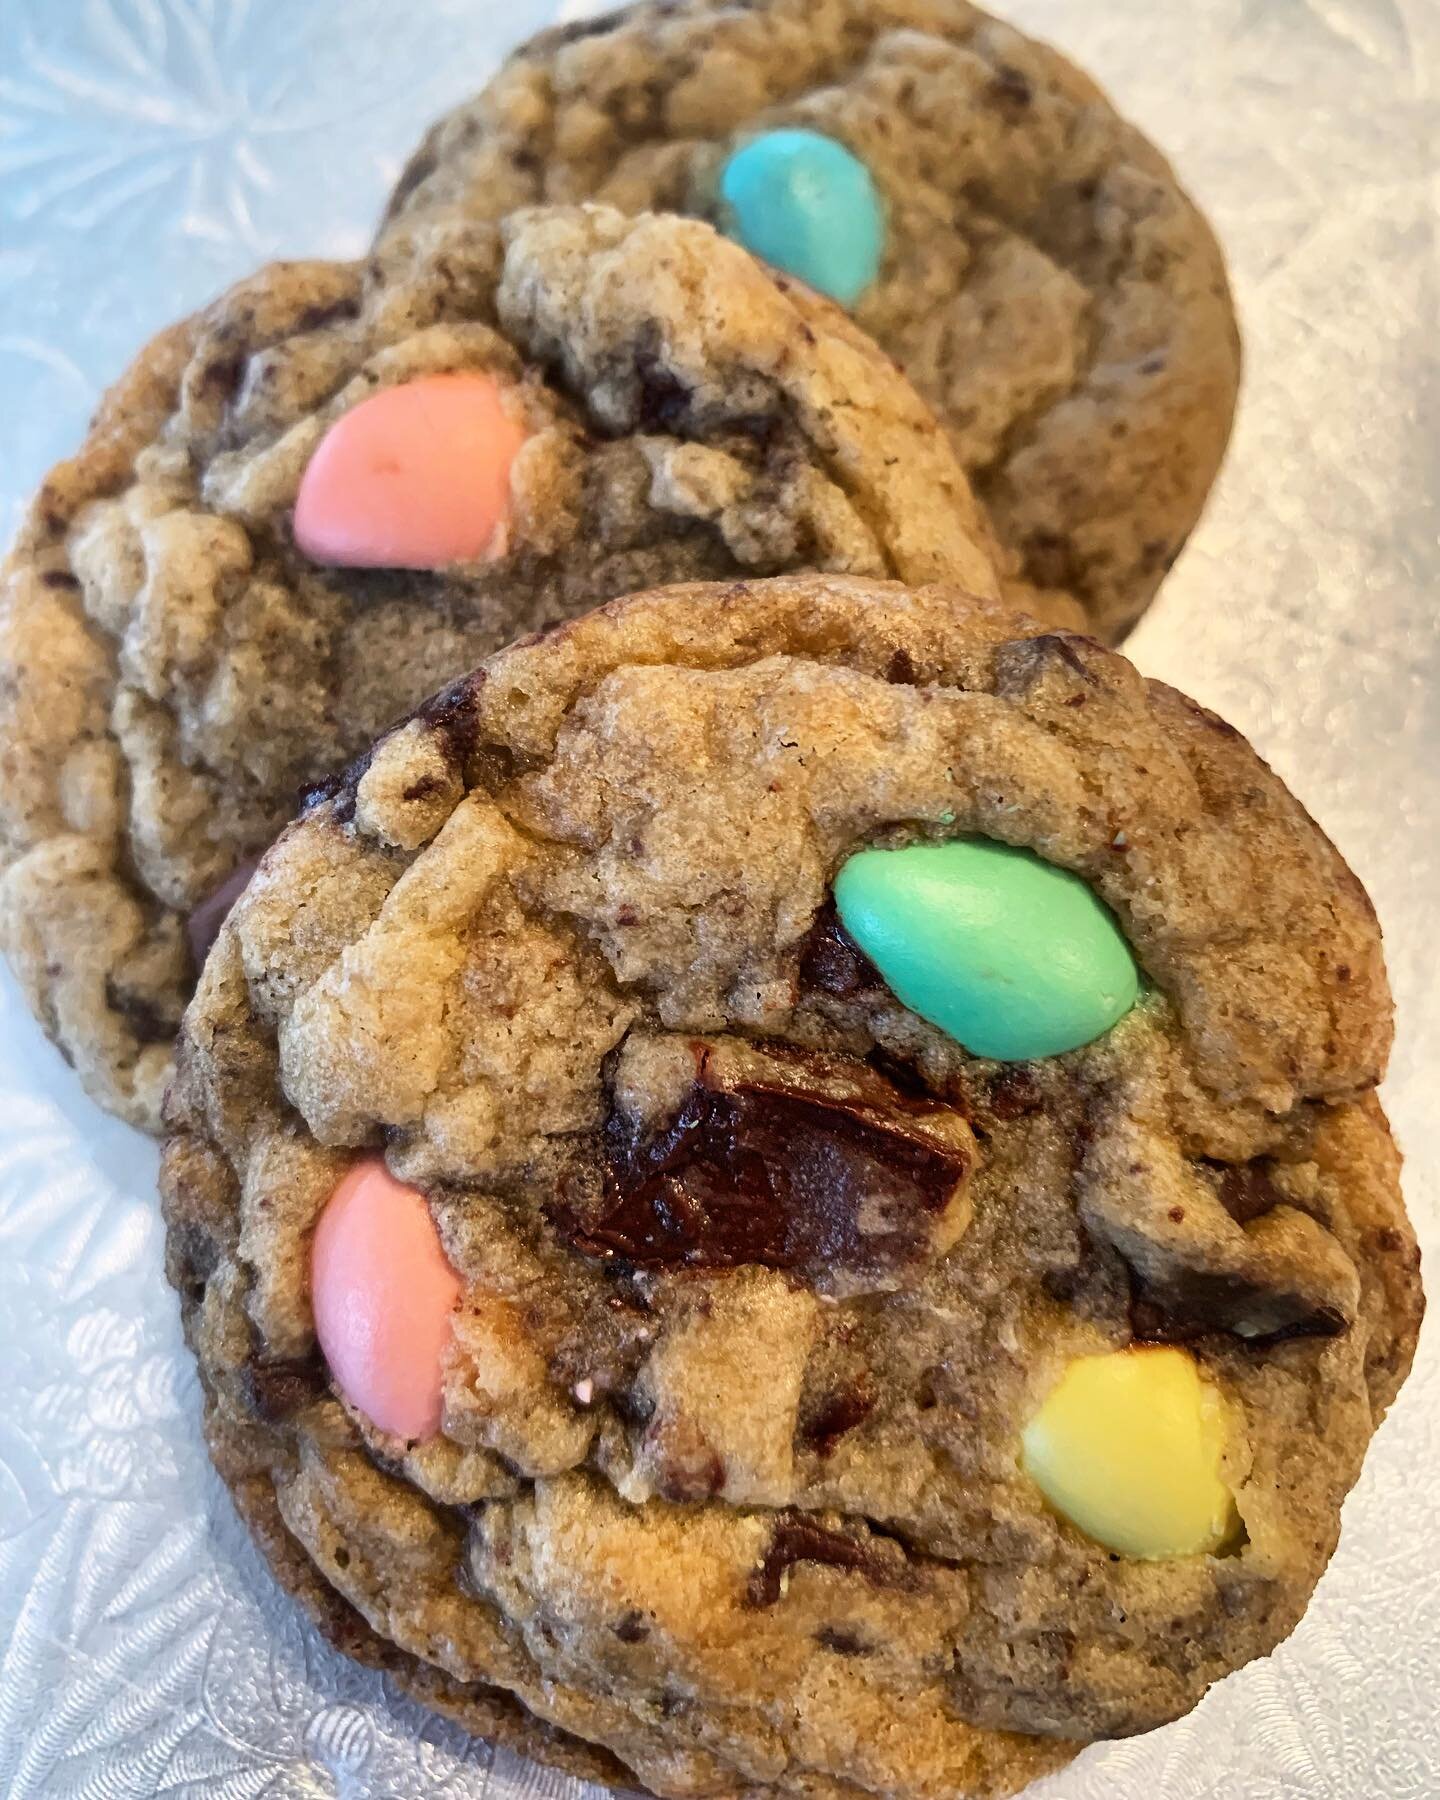 👀❕COMING SOON❕
A decedent crispy on the outside, chewy on the inside Mini Egg chocolate CHUNK cookie! 
Stay tuned!